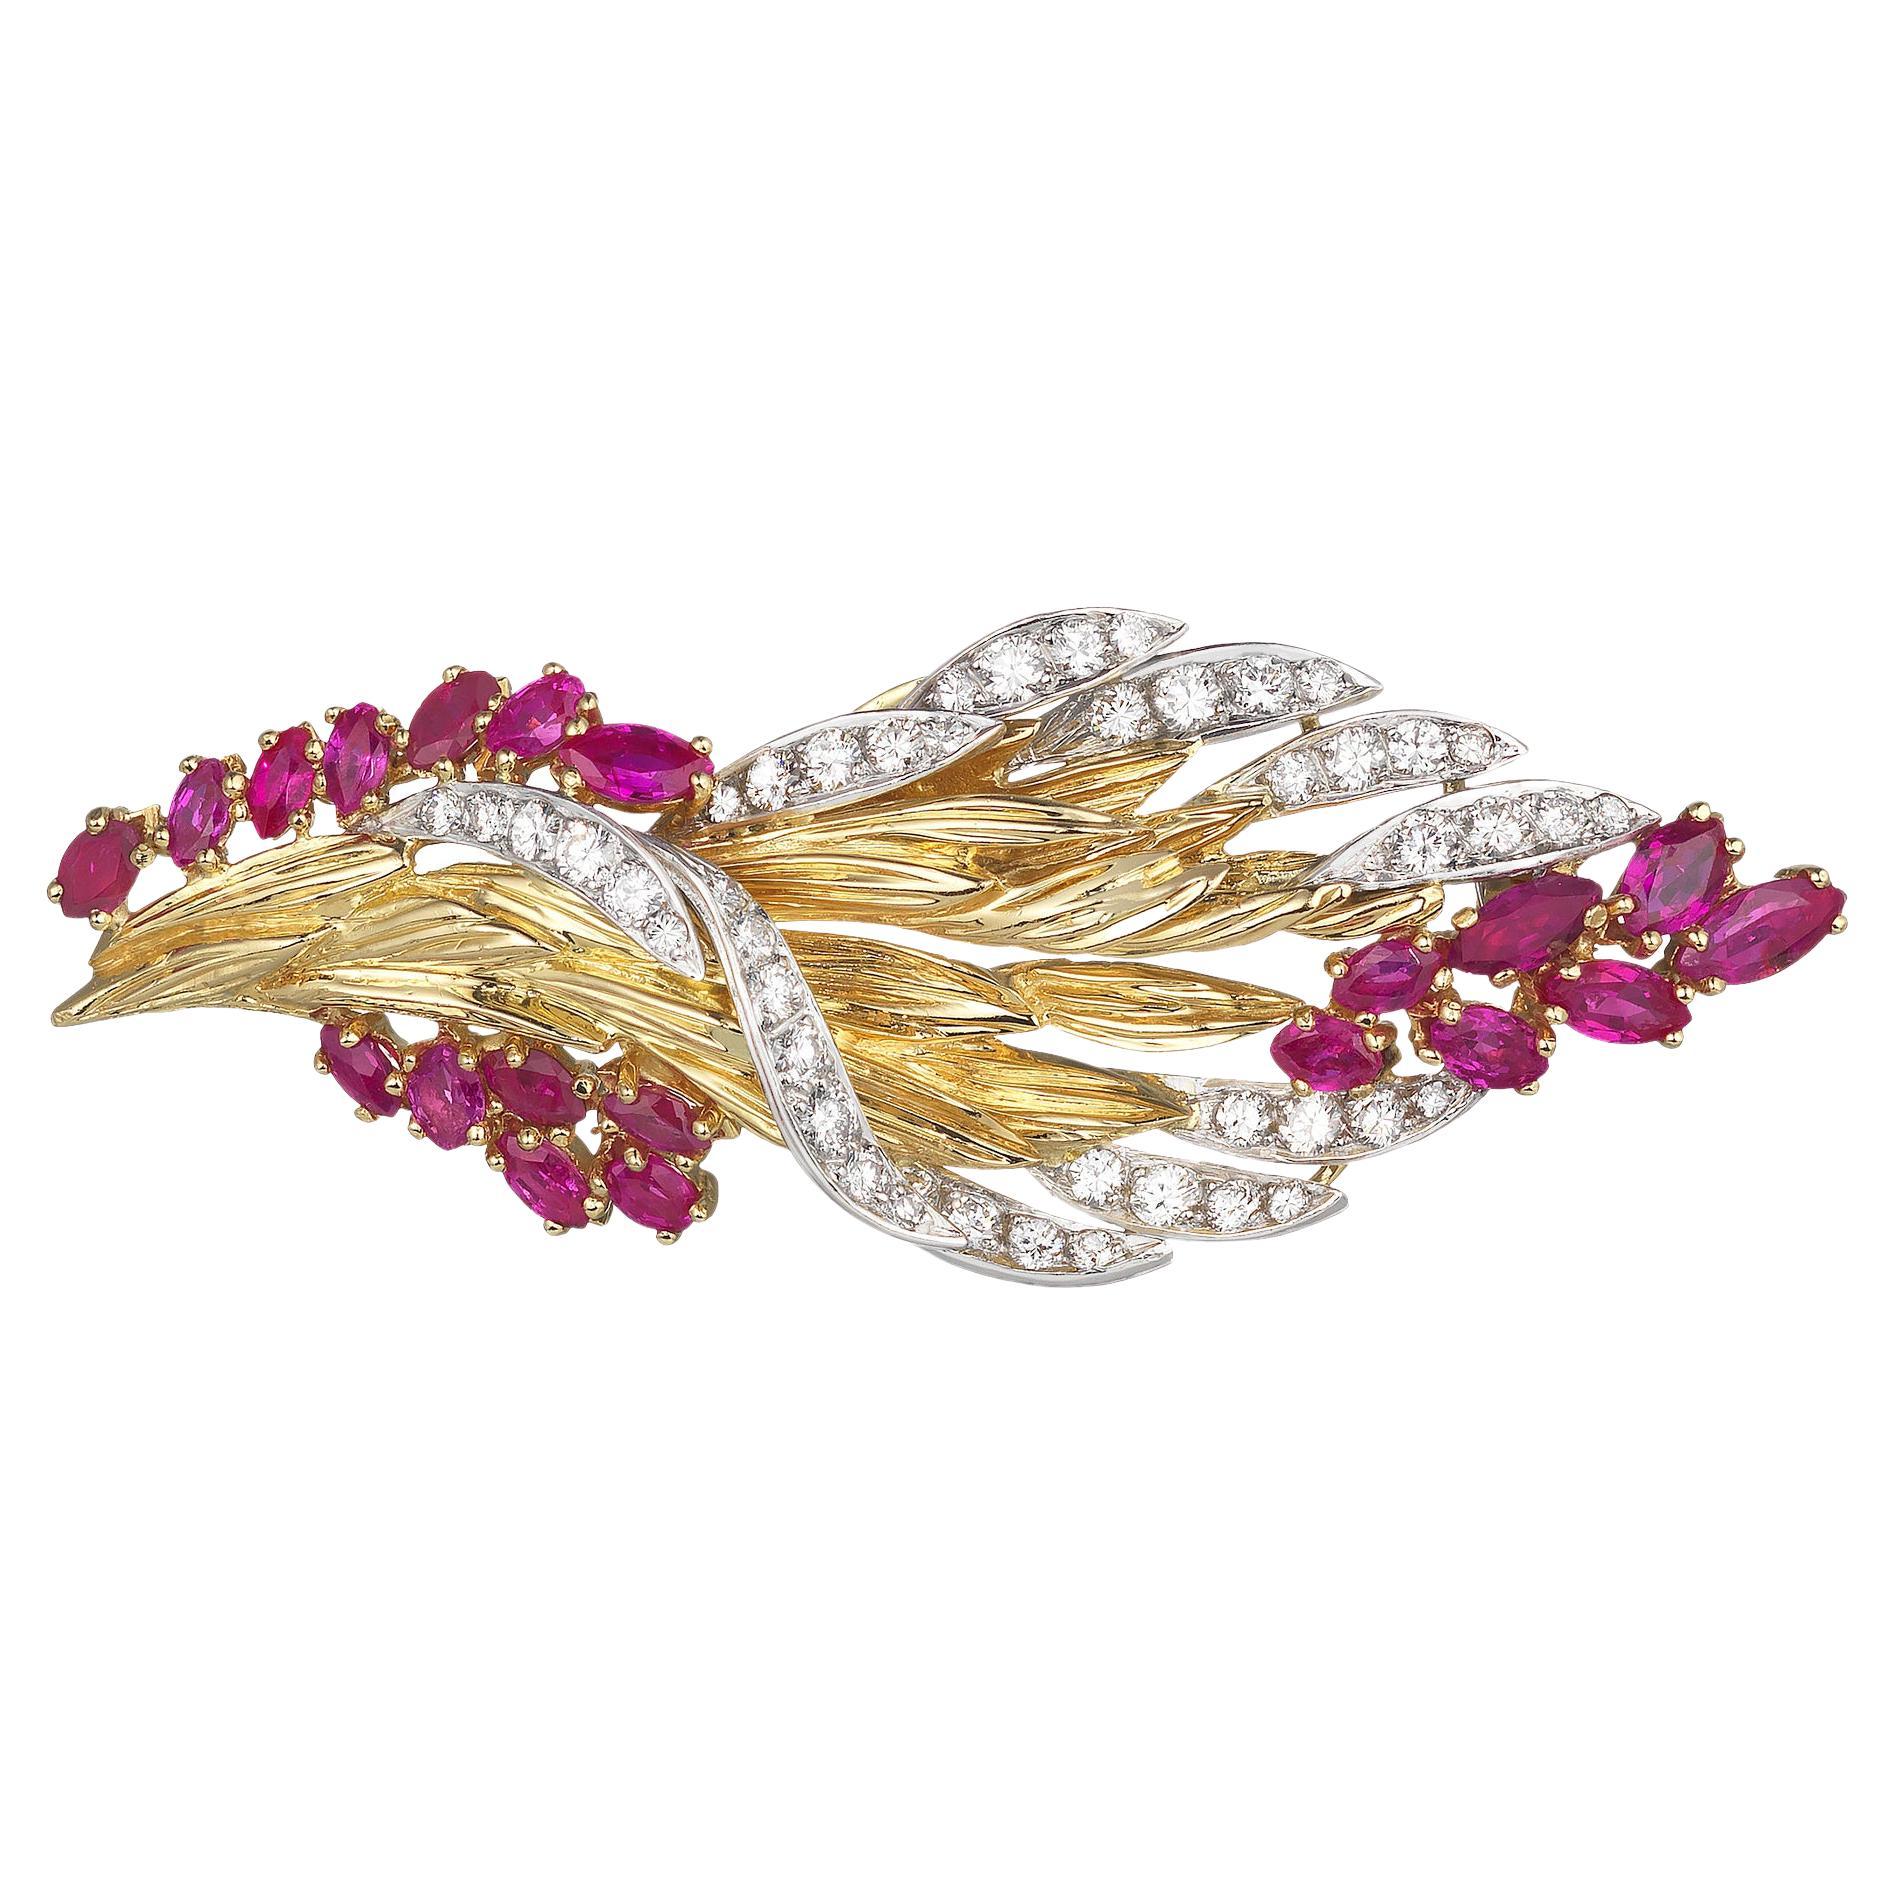 Retro 1950s Diamond Ruby Large Bouquet Brooch in 18K Gold & Platinum For Sale